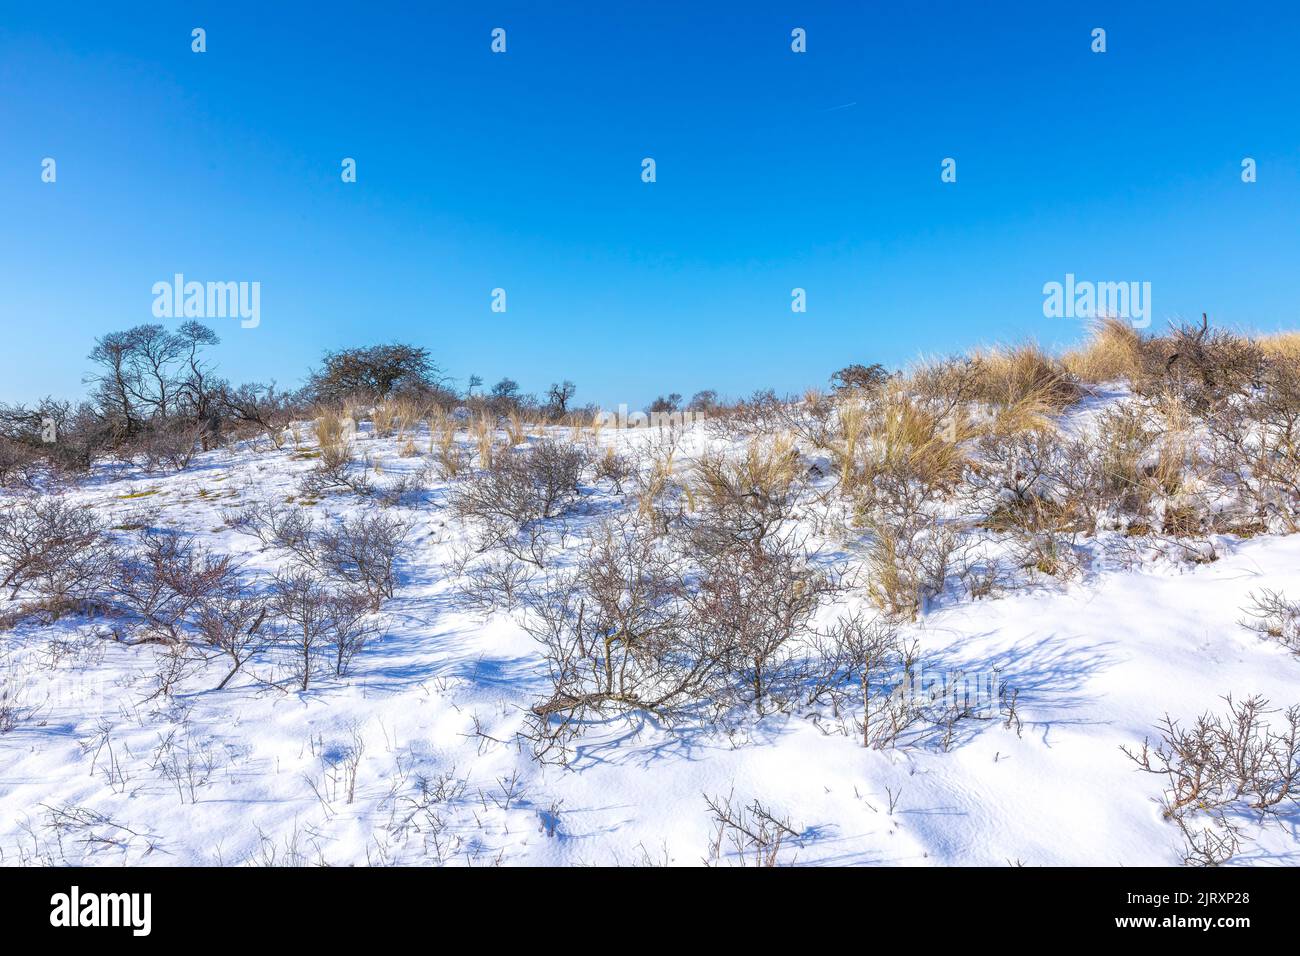 Snowy and ice winter landscape at the Amsterdamse Waterleidingduinen, clear blue sky. Stock Photo